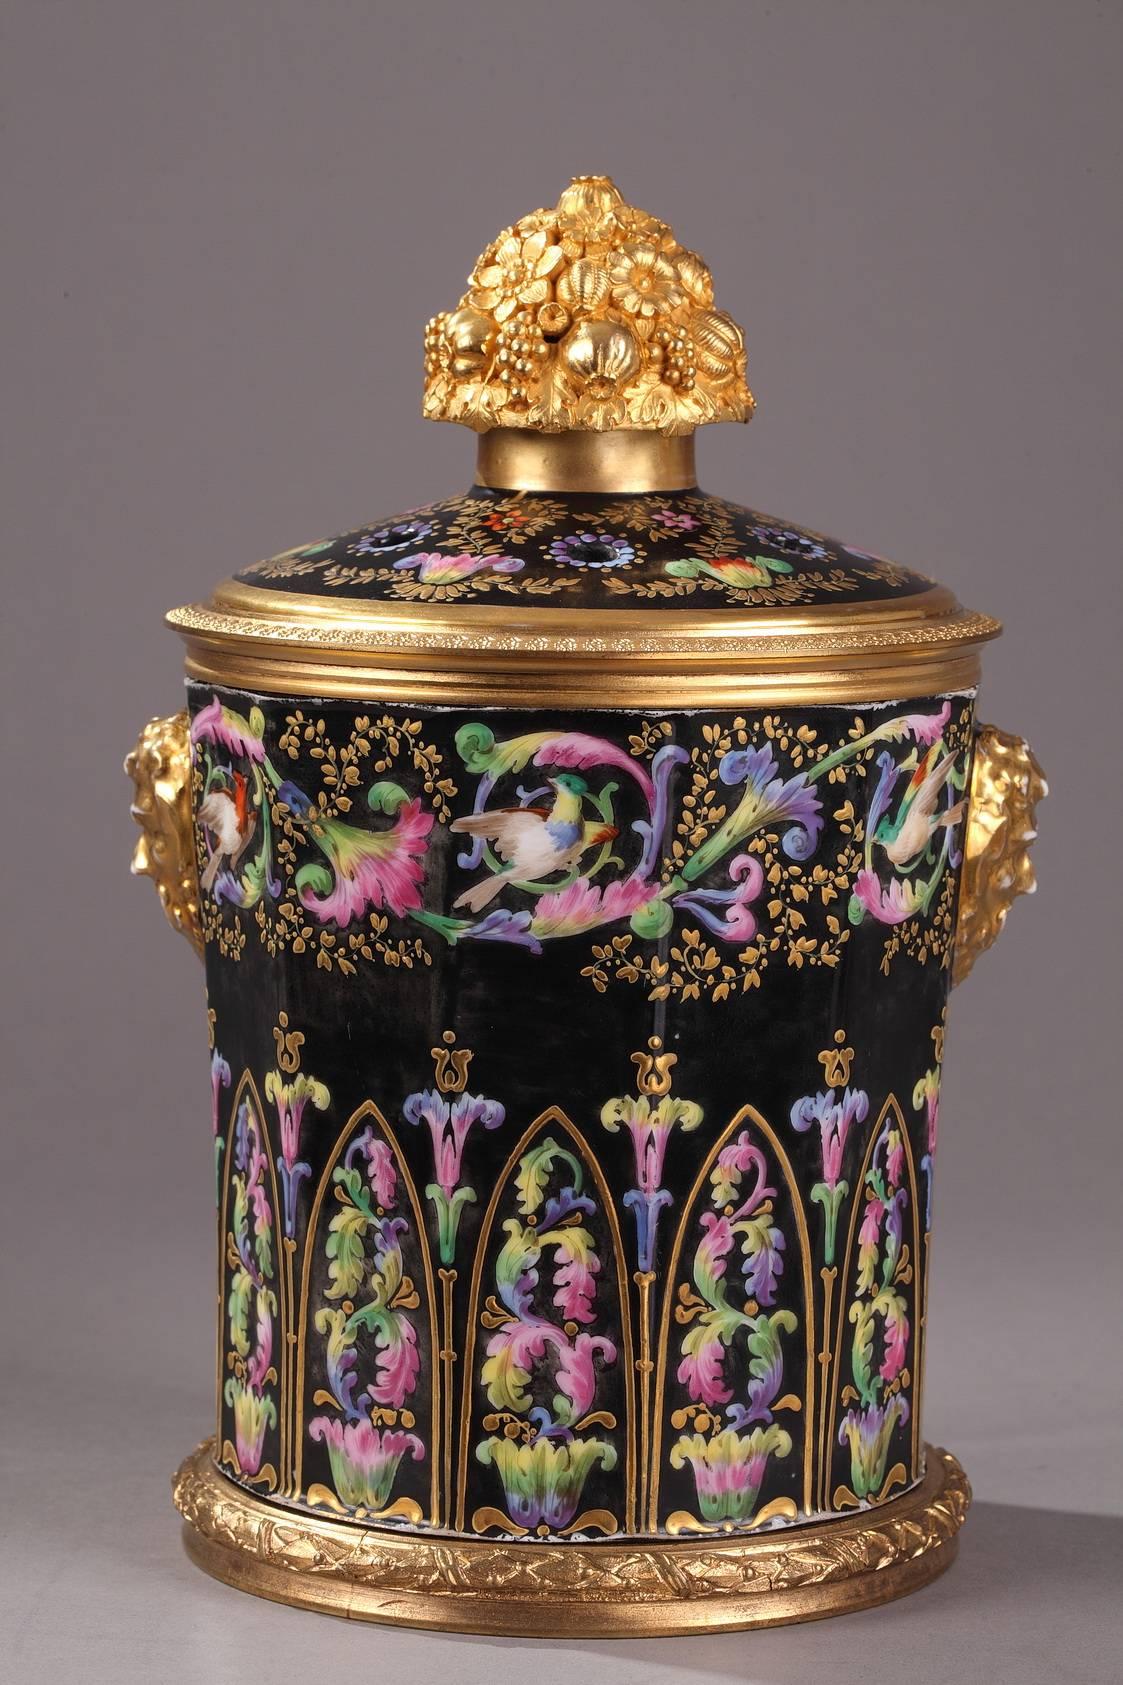 Pair of pot-pourri vases covered with a pierced, multicolored, porcelain lid. They are richly decorated with flowering scrollwork and birds set over a black background highlighted with gold accents. The covers are painted with foliage and topped